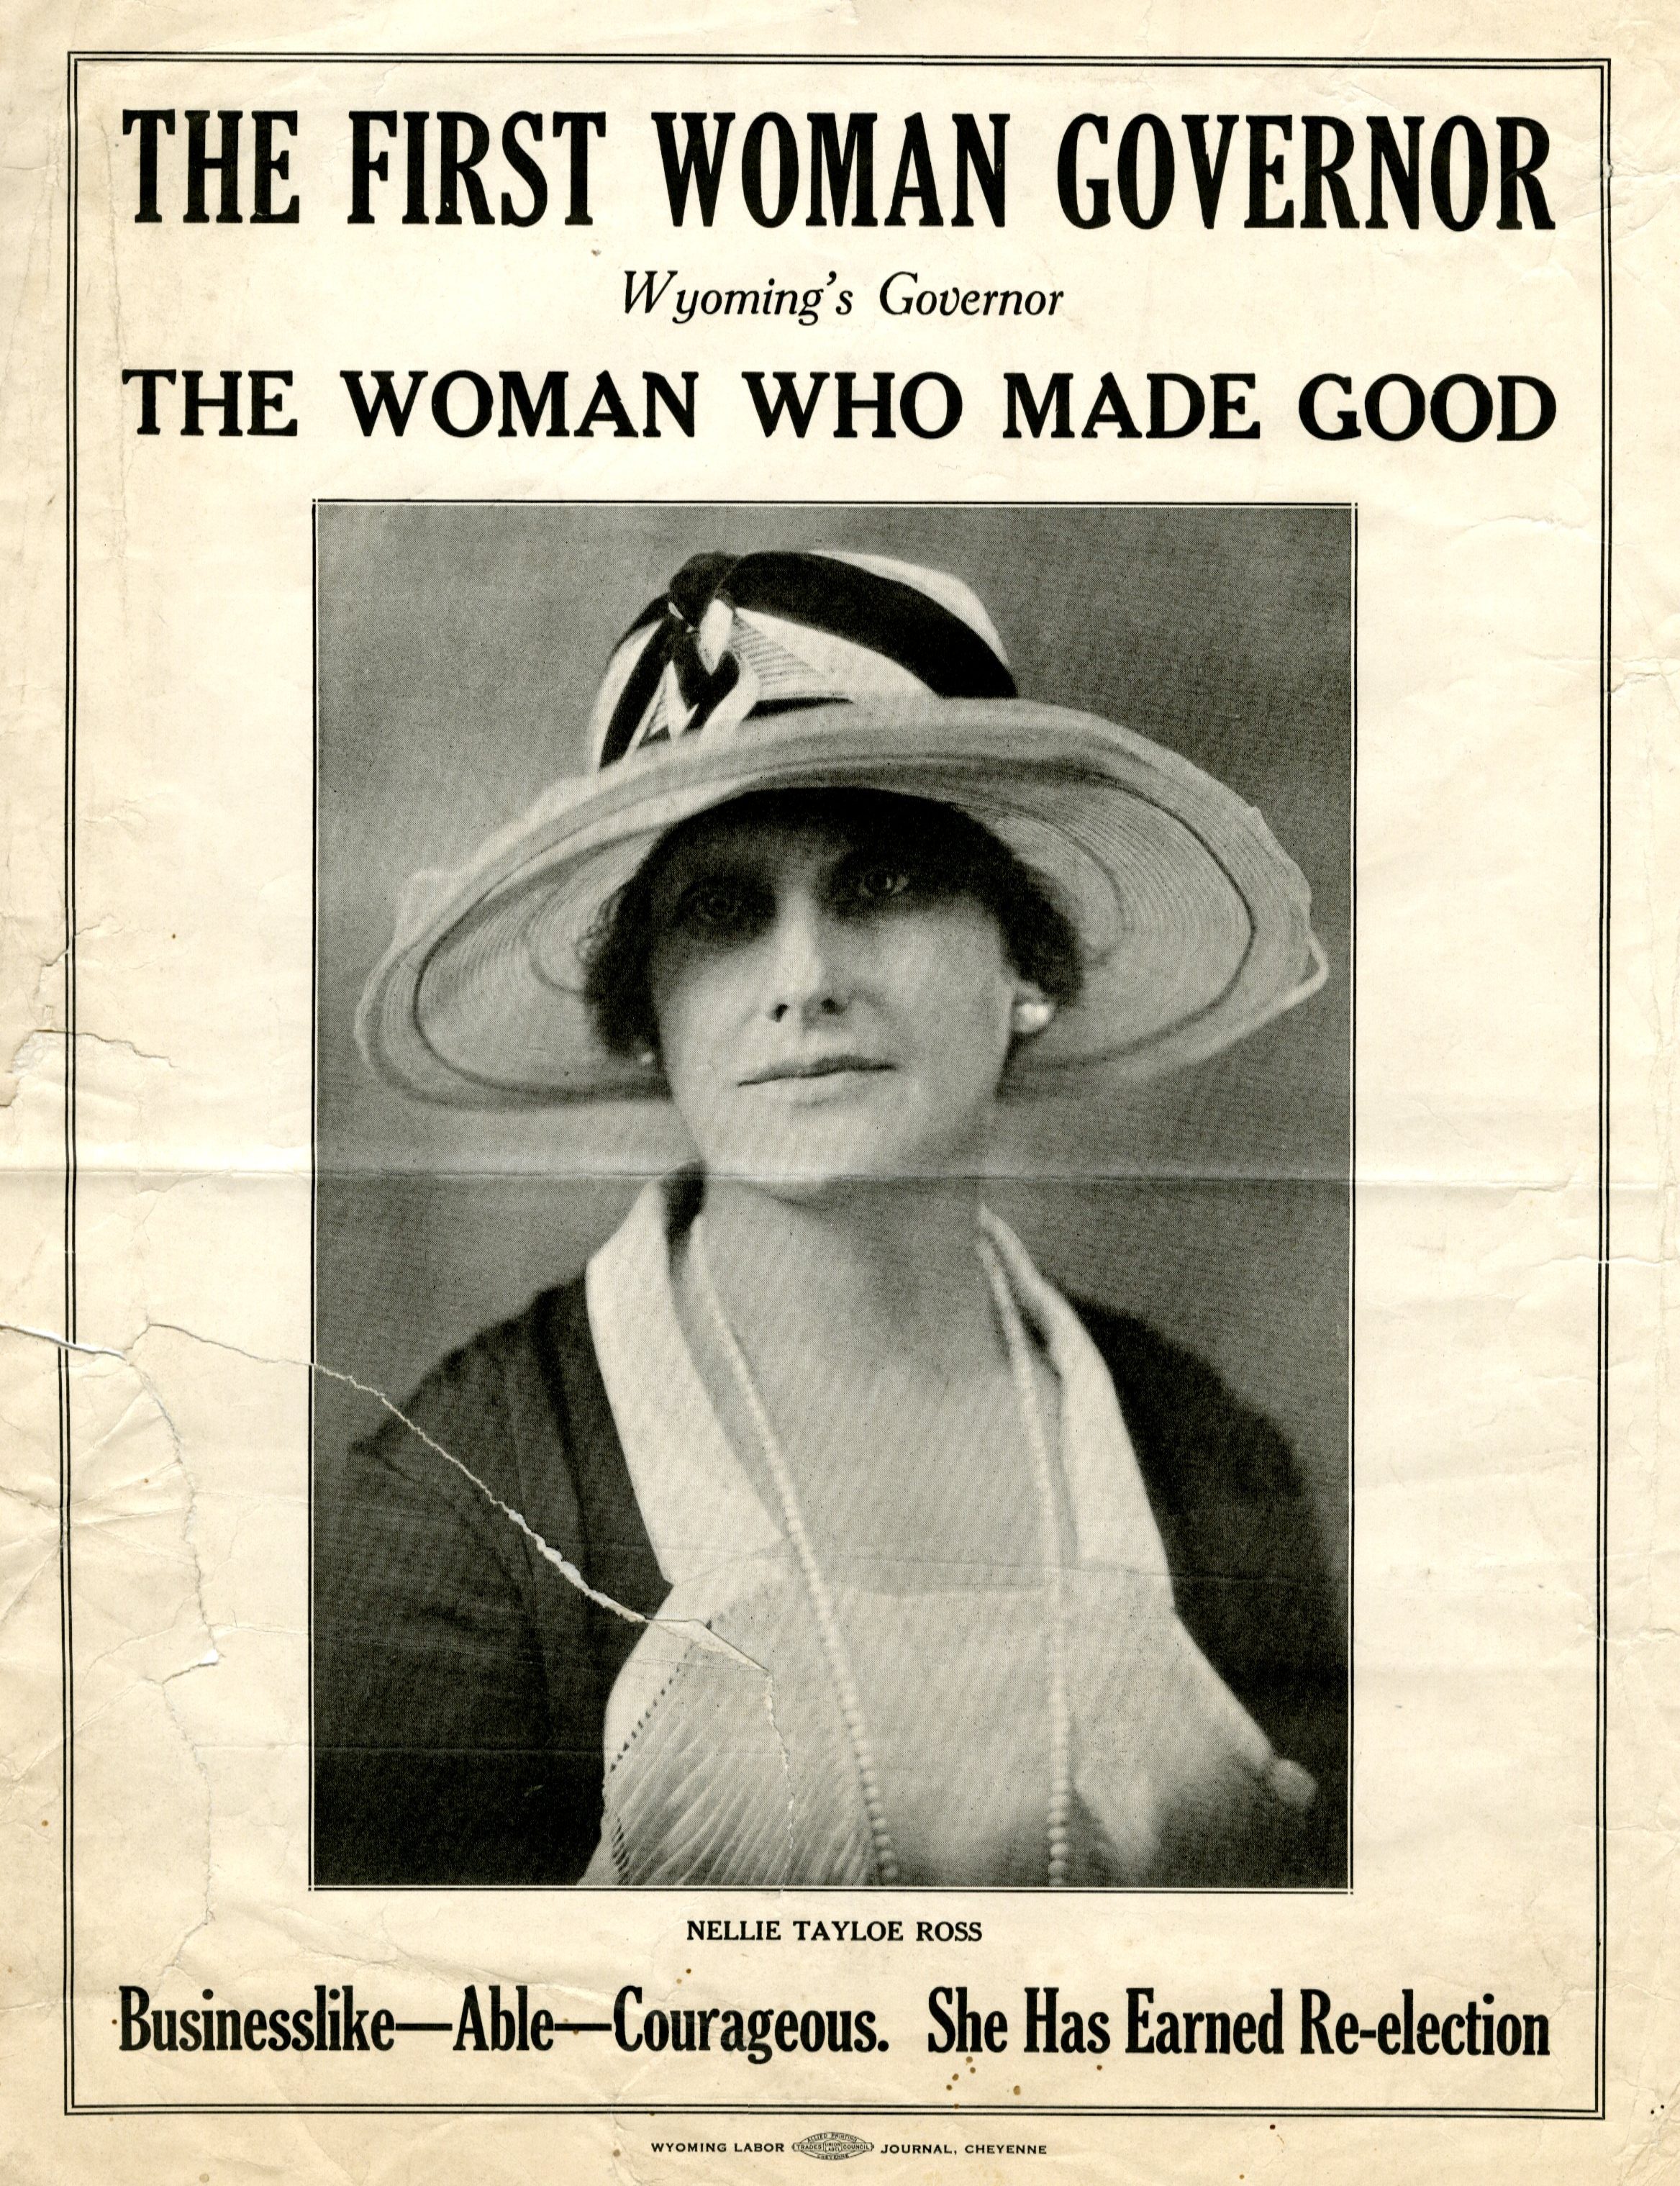 Nellie Tayloe Ross: "The Woman Who Made Good"